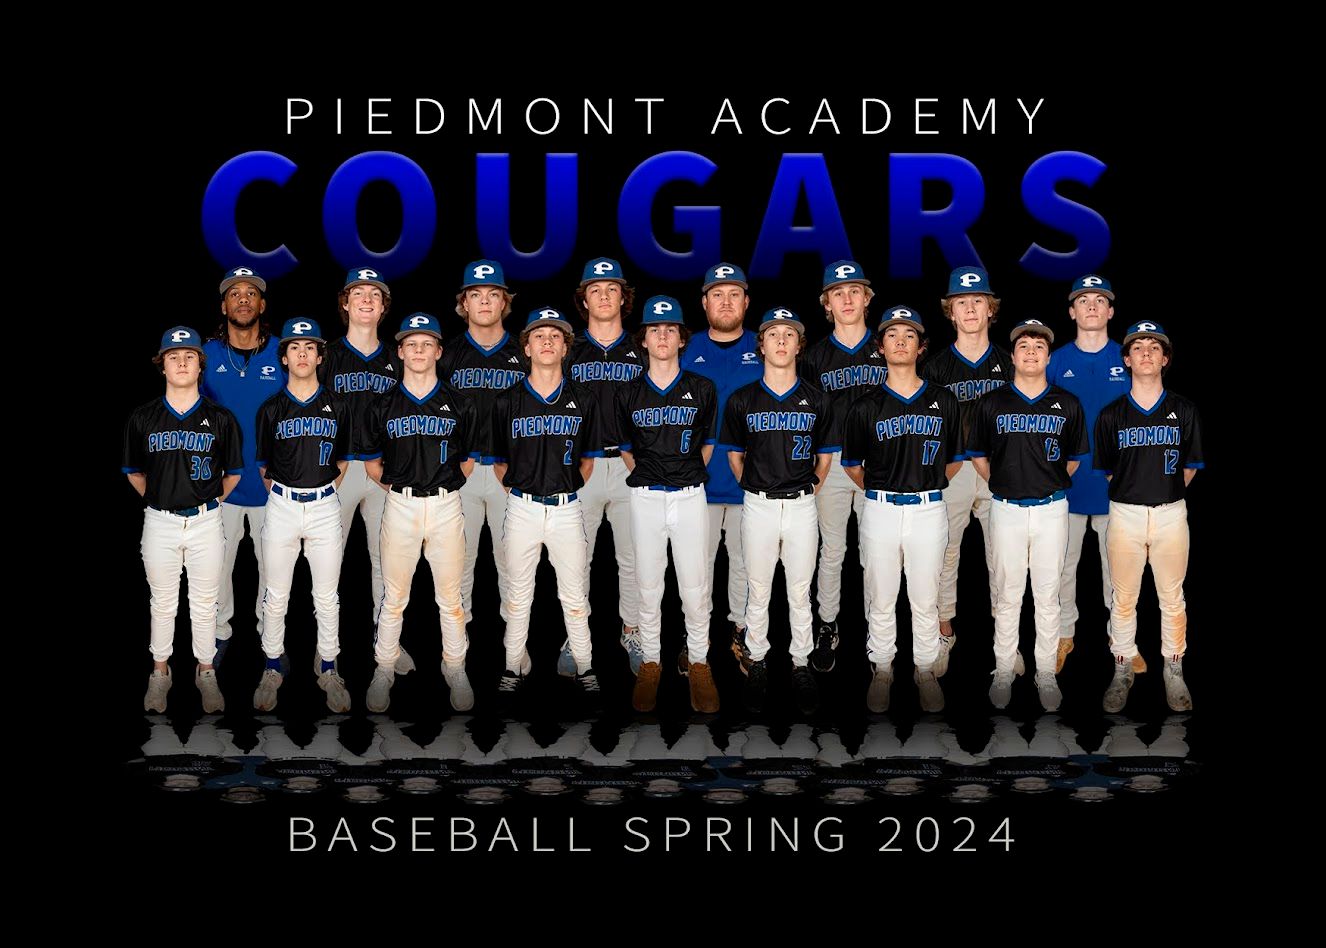 the piedmont academy cougars baseball team is posing for a team photo .